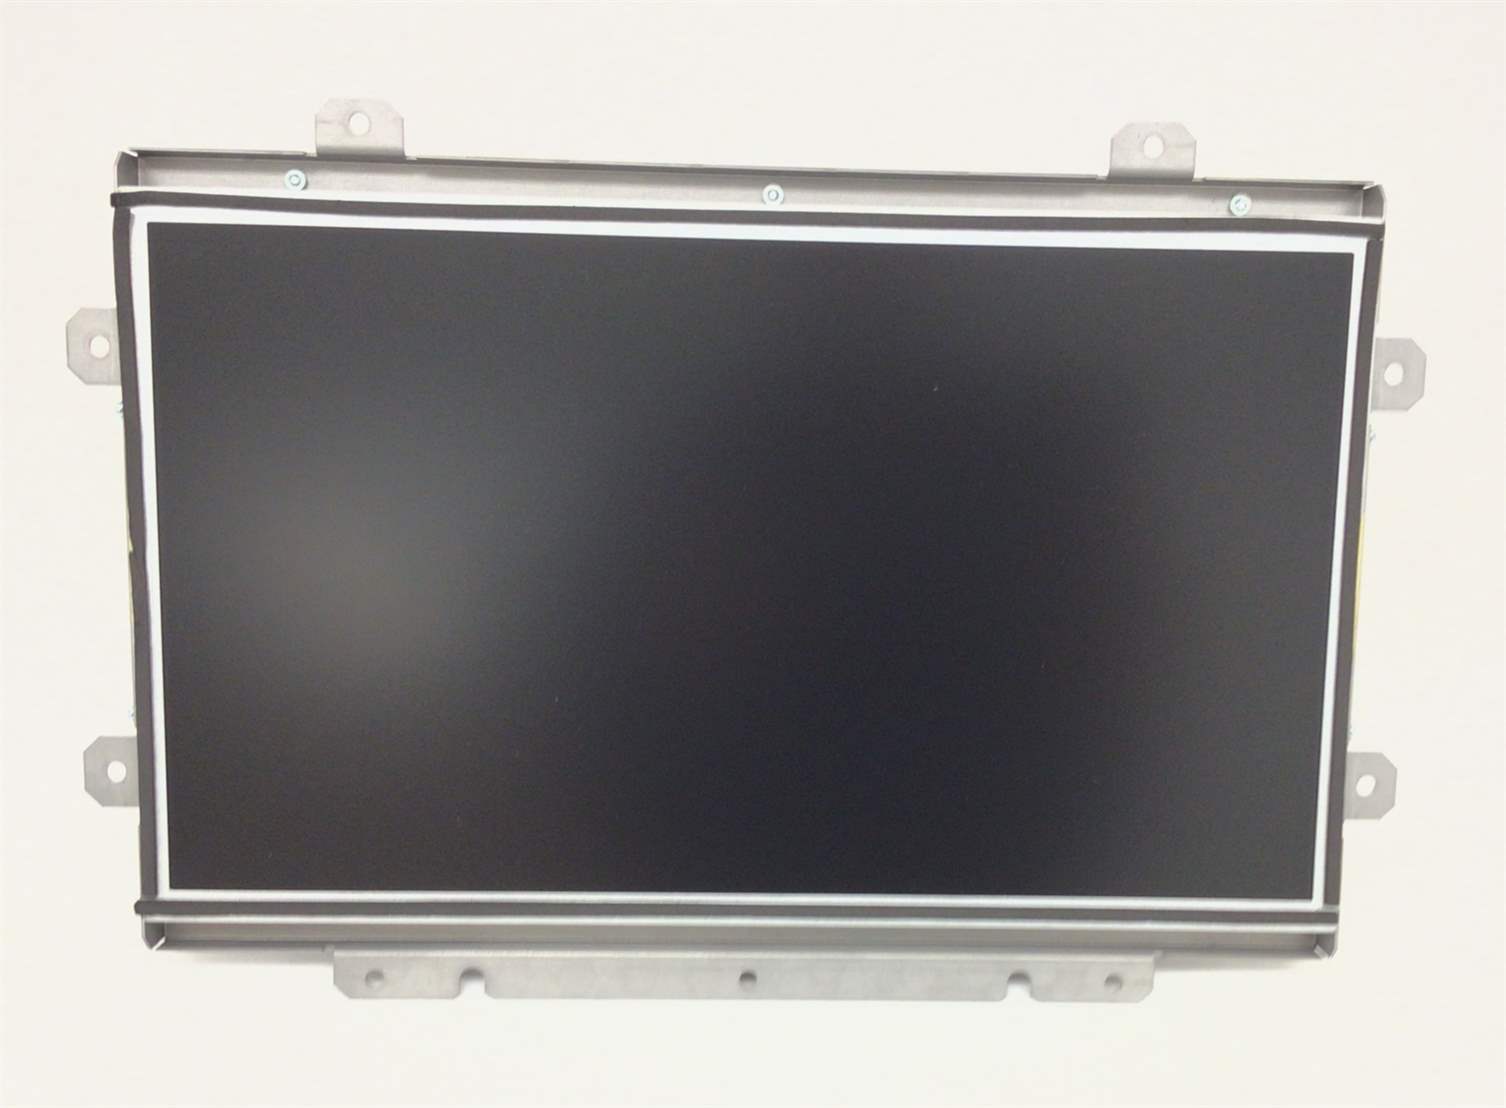 LCD Display Assembly EPEM and Bezel Assembly ATSC (Used)